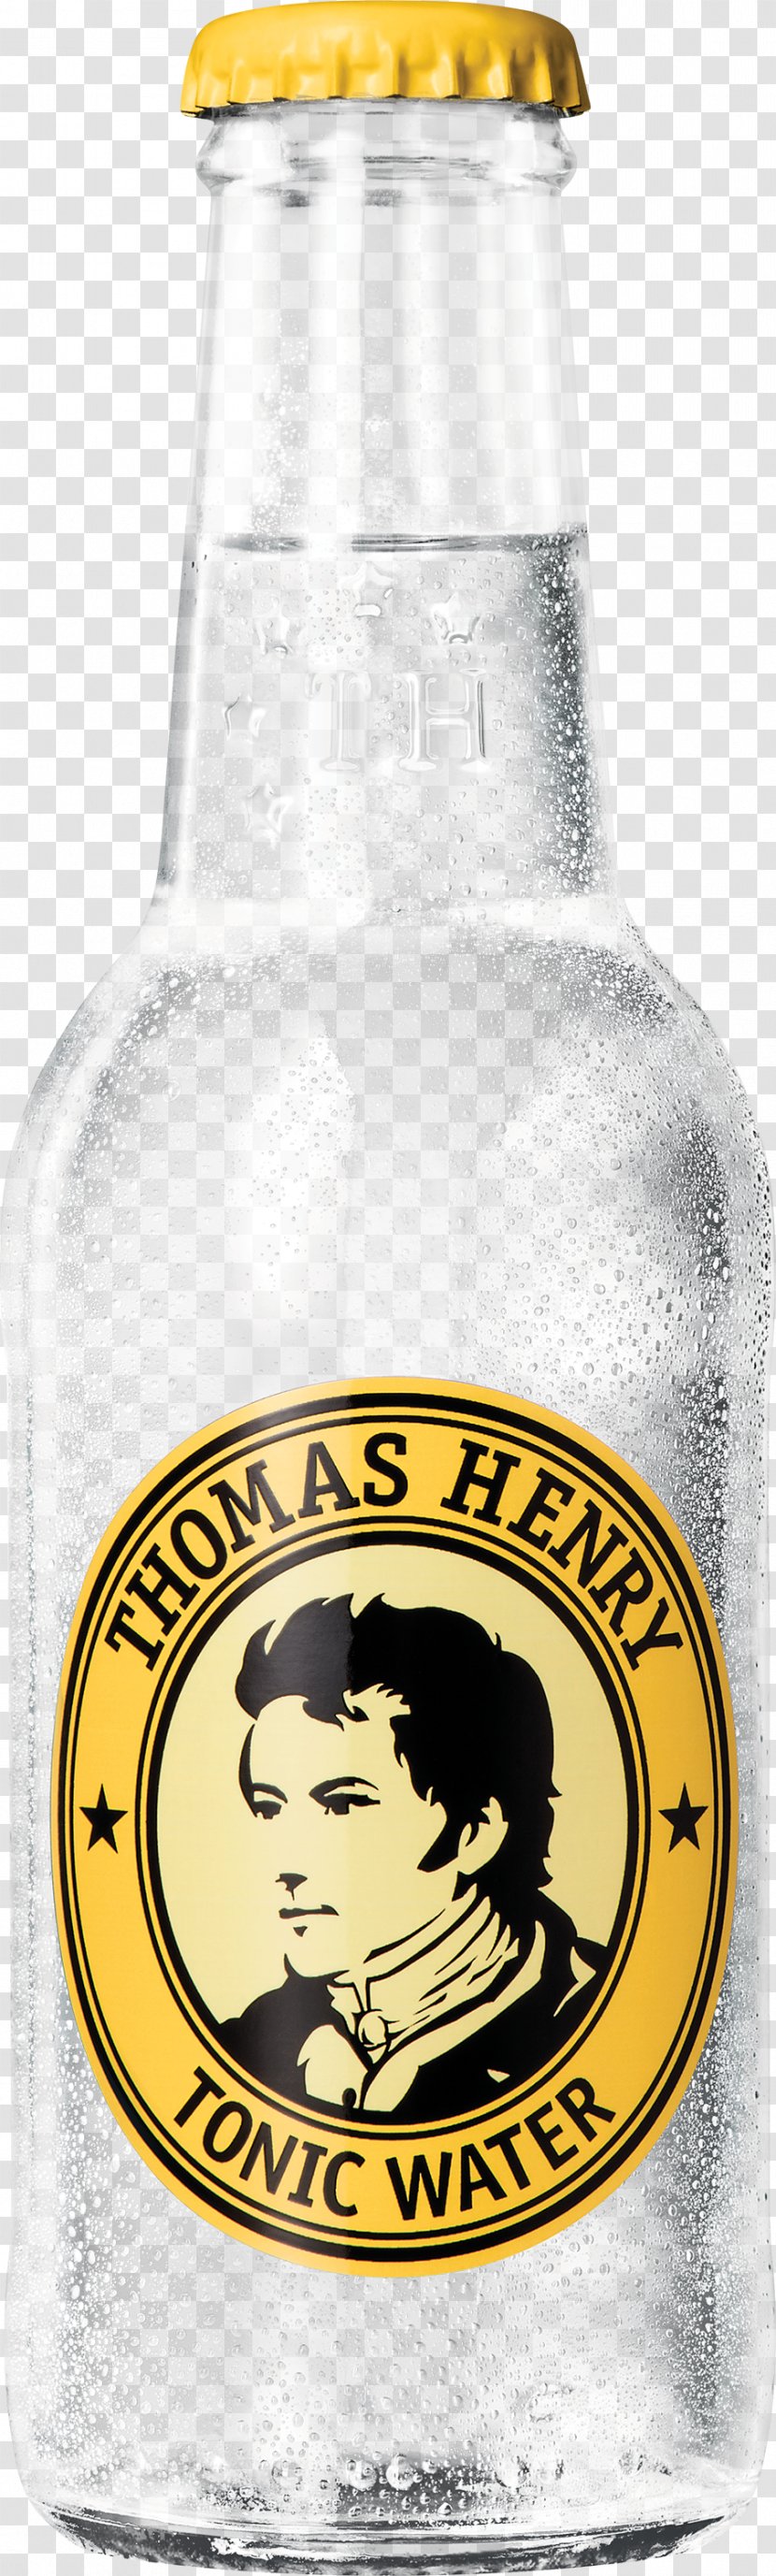 Tonic Water Gin Bitter Lemon Cocktail Fizzy Drinks - And Transparent PNG